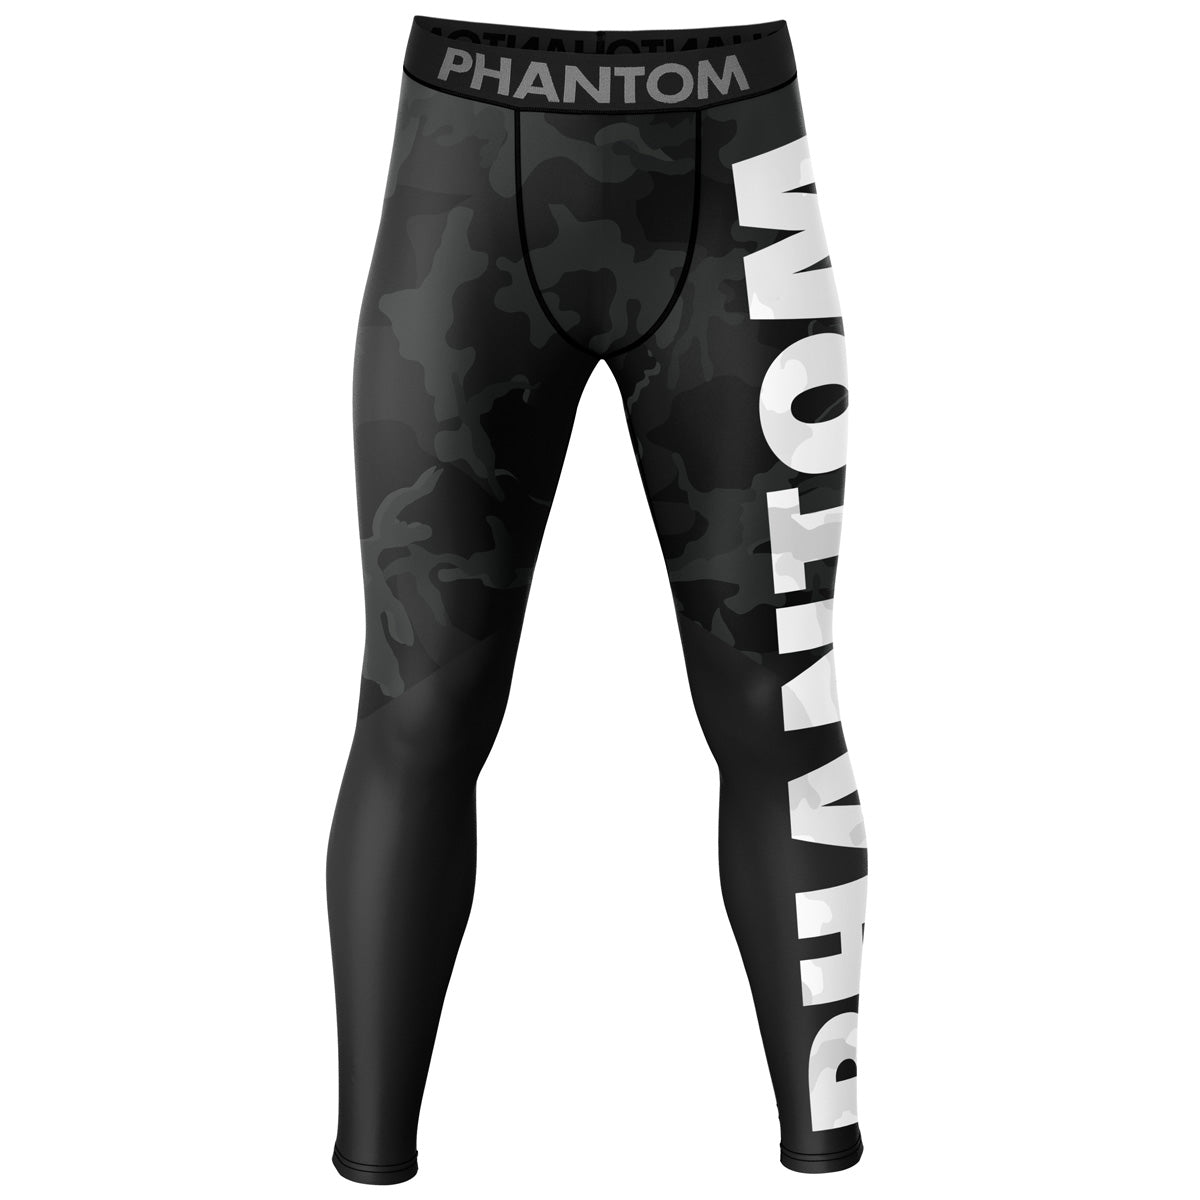 Compression Pants (Spats), First Among Equals